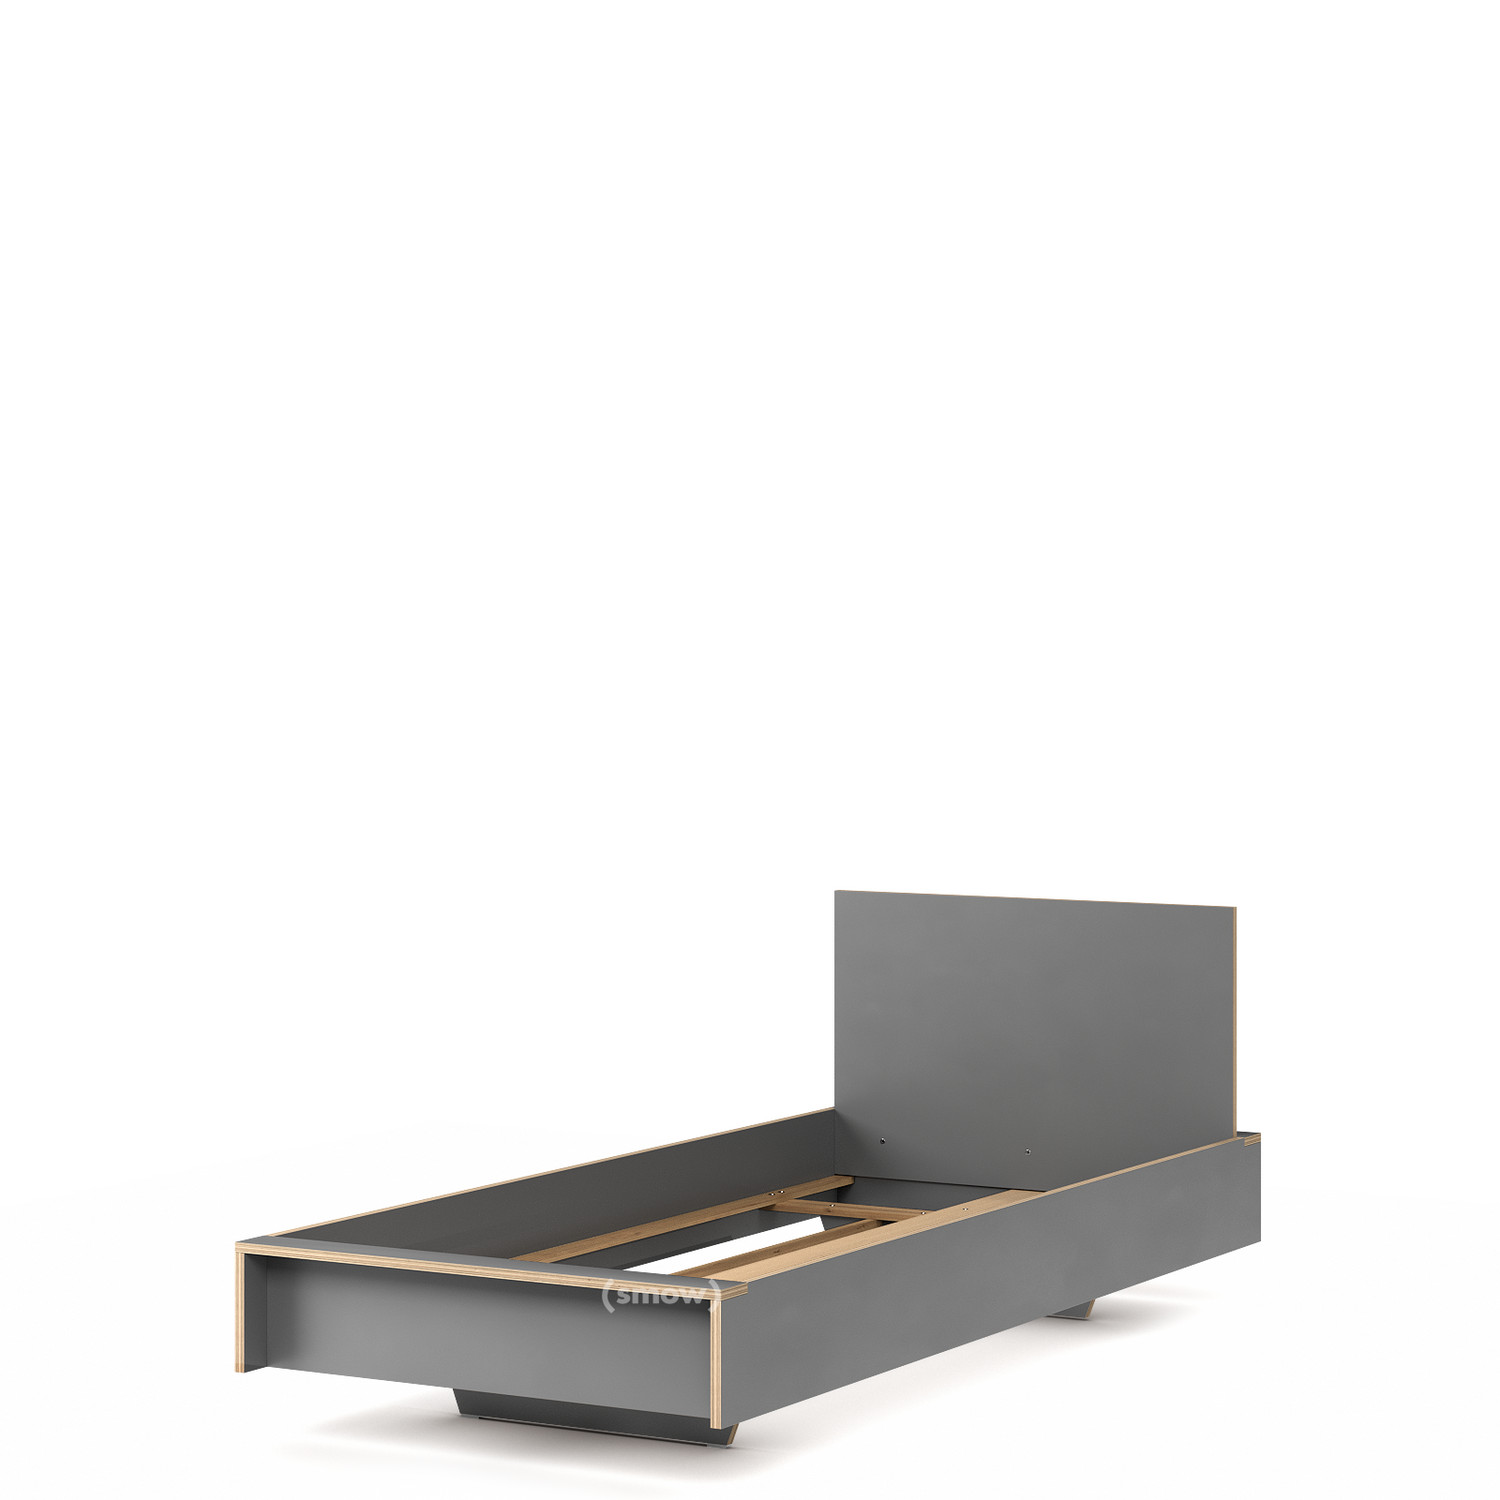 Brawl Getand Oneffenheden Müller Small Living Flai Bed, 90 x 200, With headboard, CPL anthracite,  Without slatted frame by Kaschkasch, 2015 - Designer furniture by smow.com